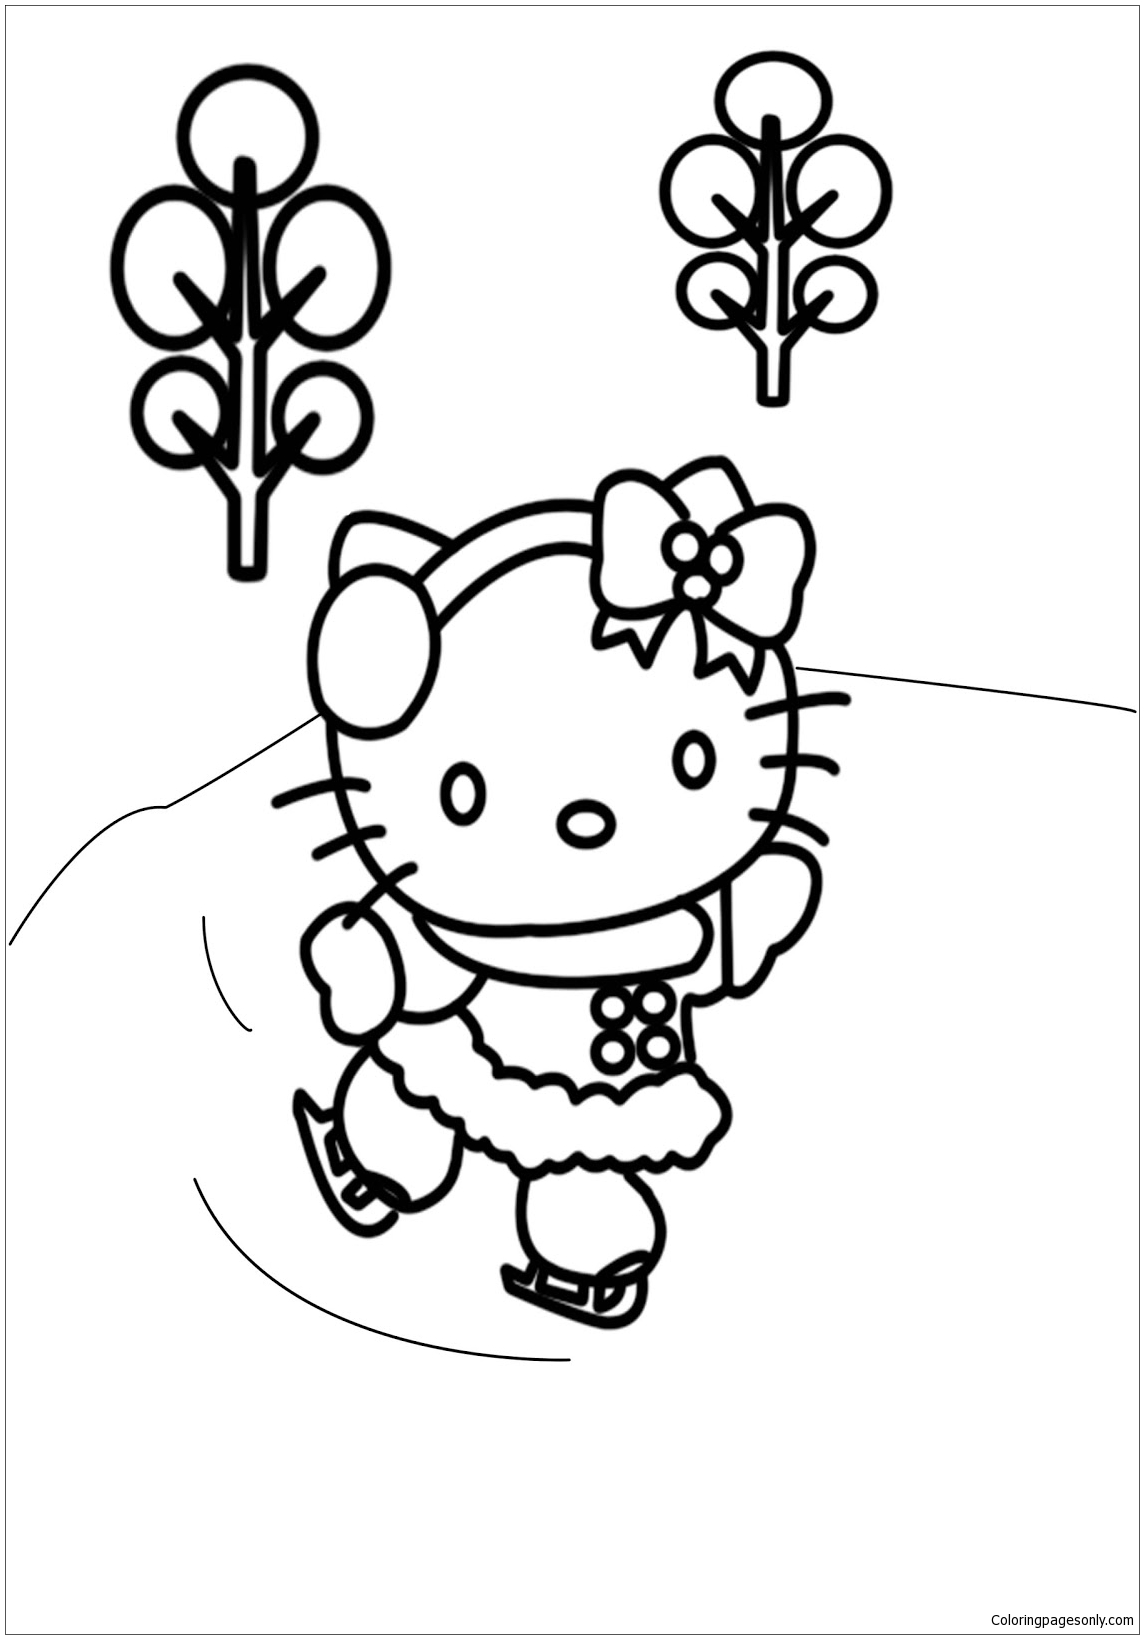 Lol Coloring Pages Ice Skater - Lol Doll Line Dancer Coloring Page Free